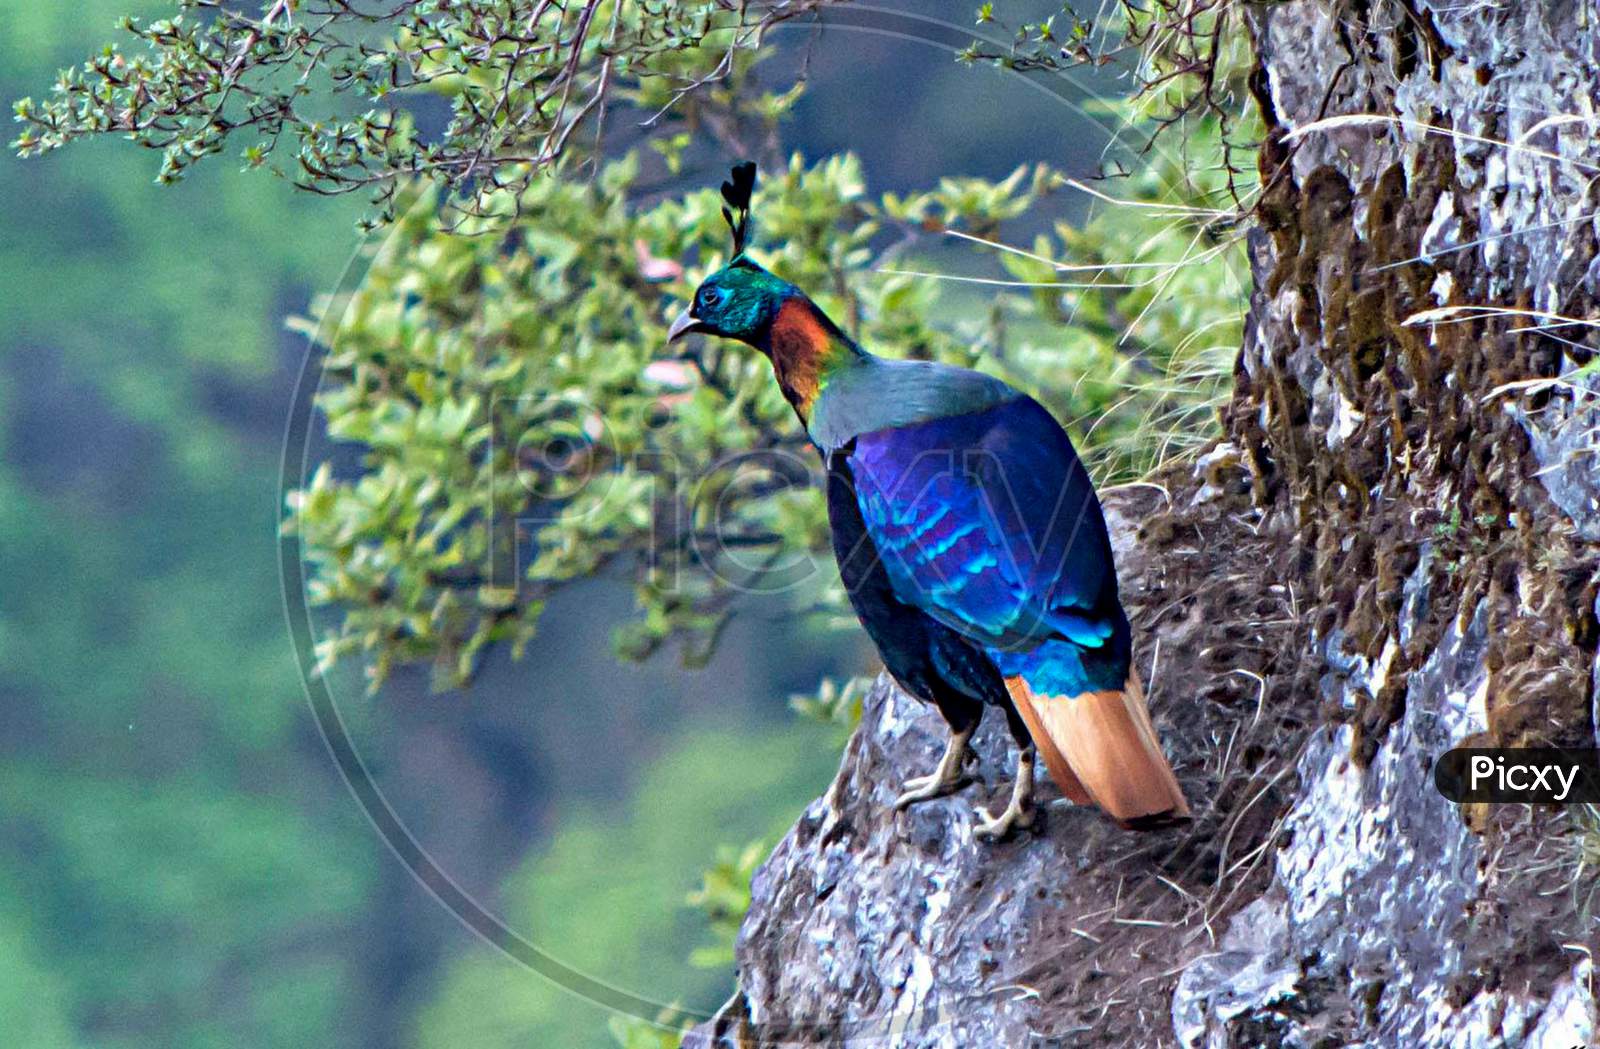 A Monal Is A Bird Of Genus Lophophorus Of The Pheasant Family, Phasianidae